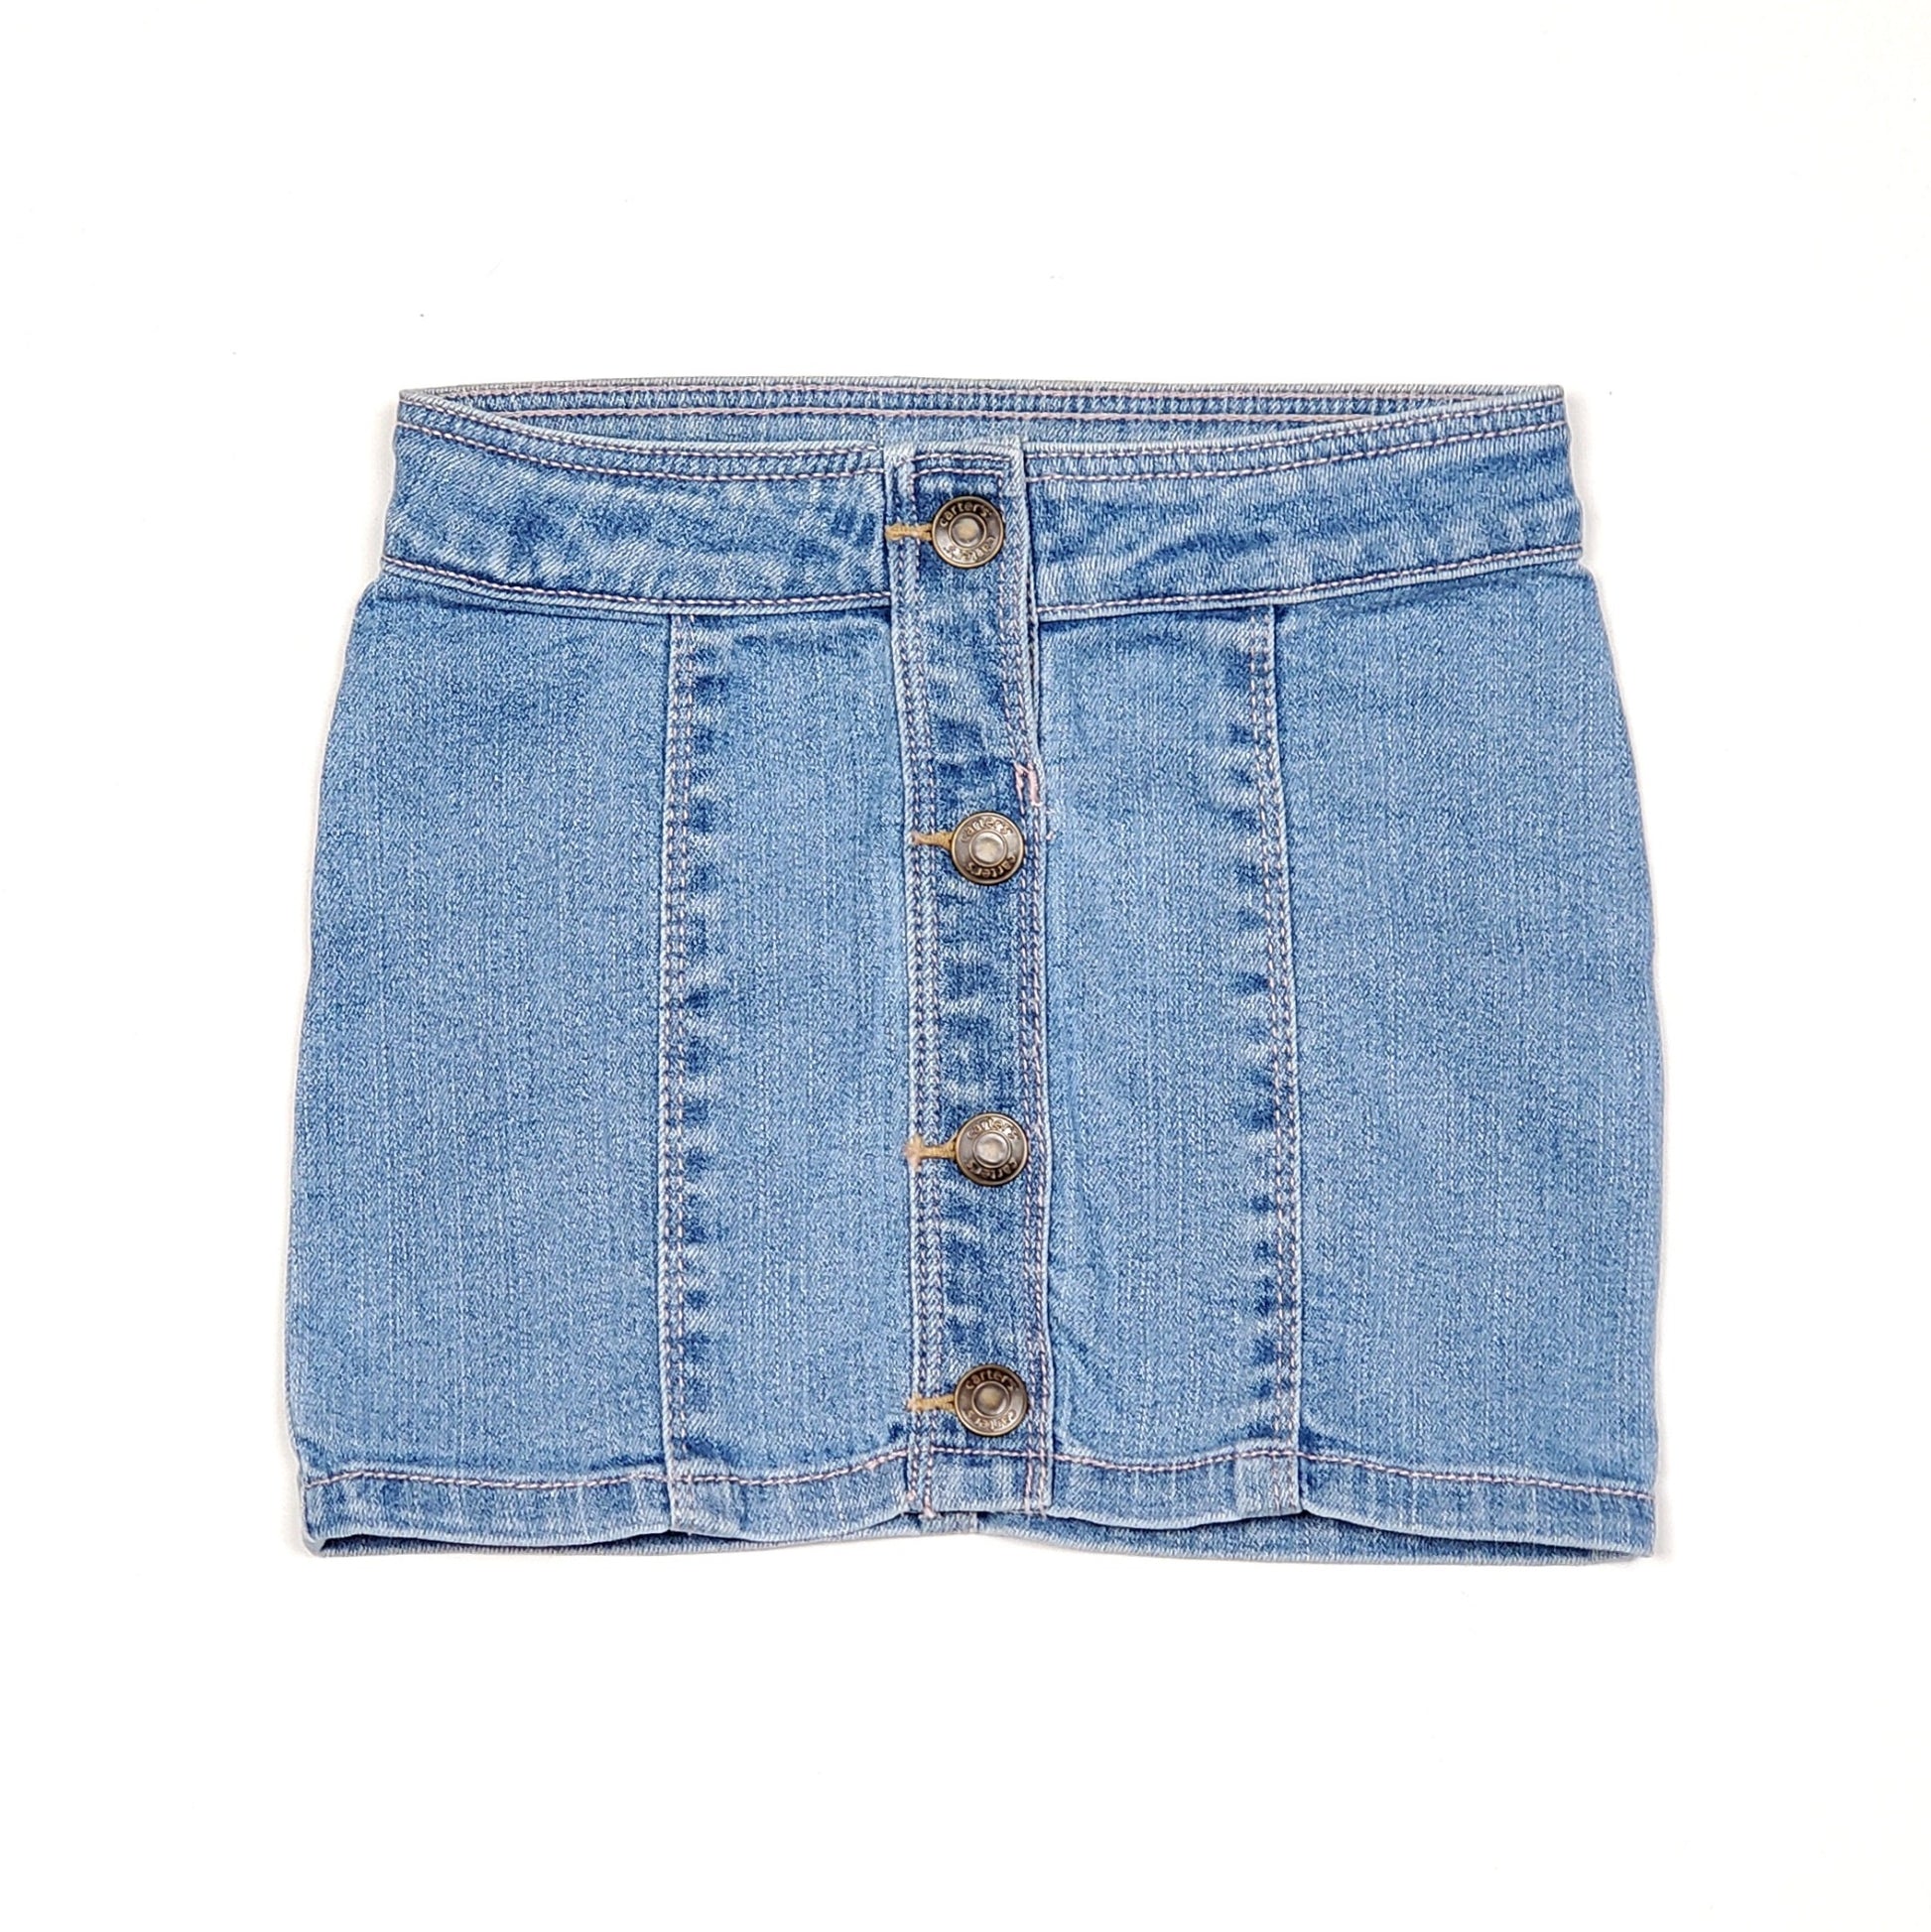 Carters Button Front Denim Girls Skirt 3T Used, front